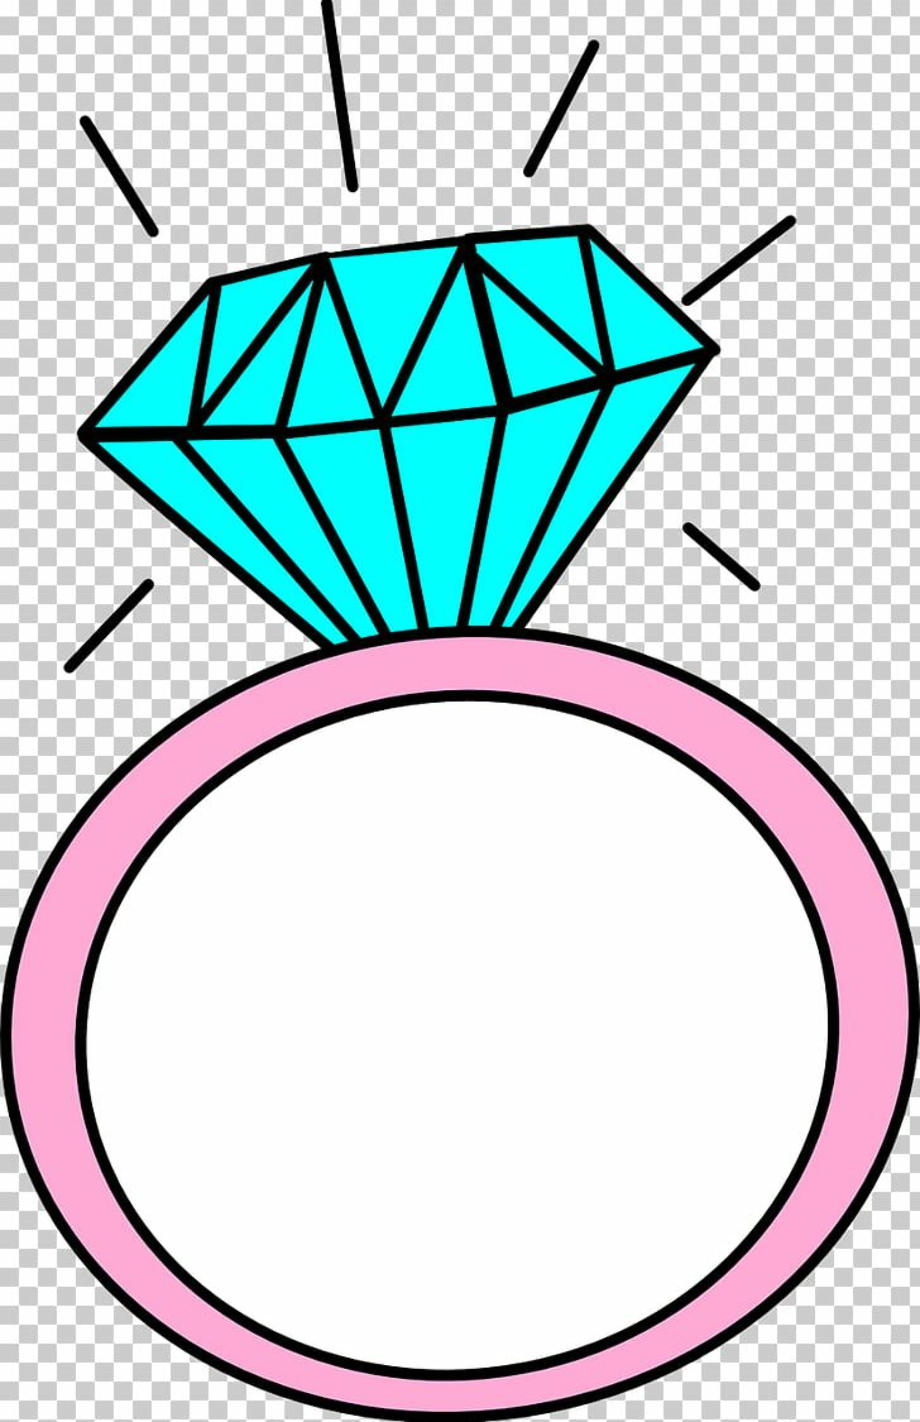 Download High Quality engagement ring clipart cartoon Transparent PNG